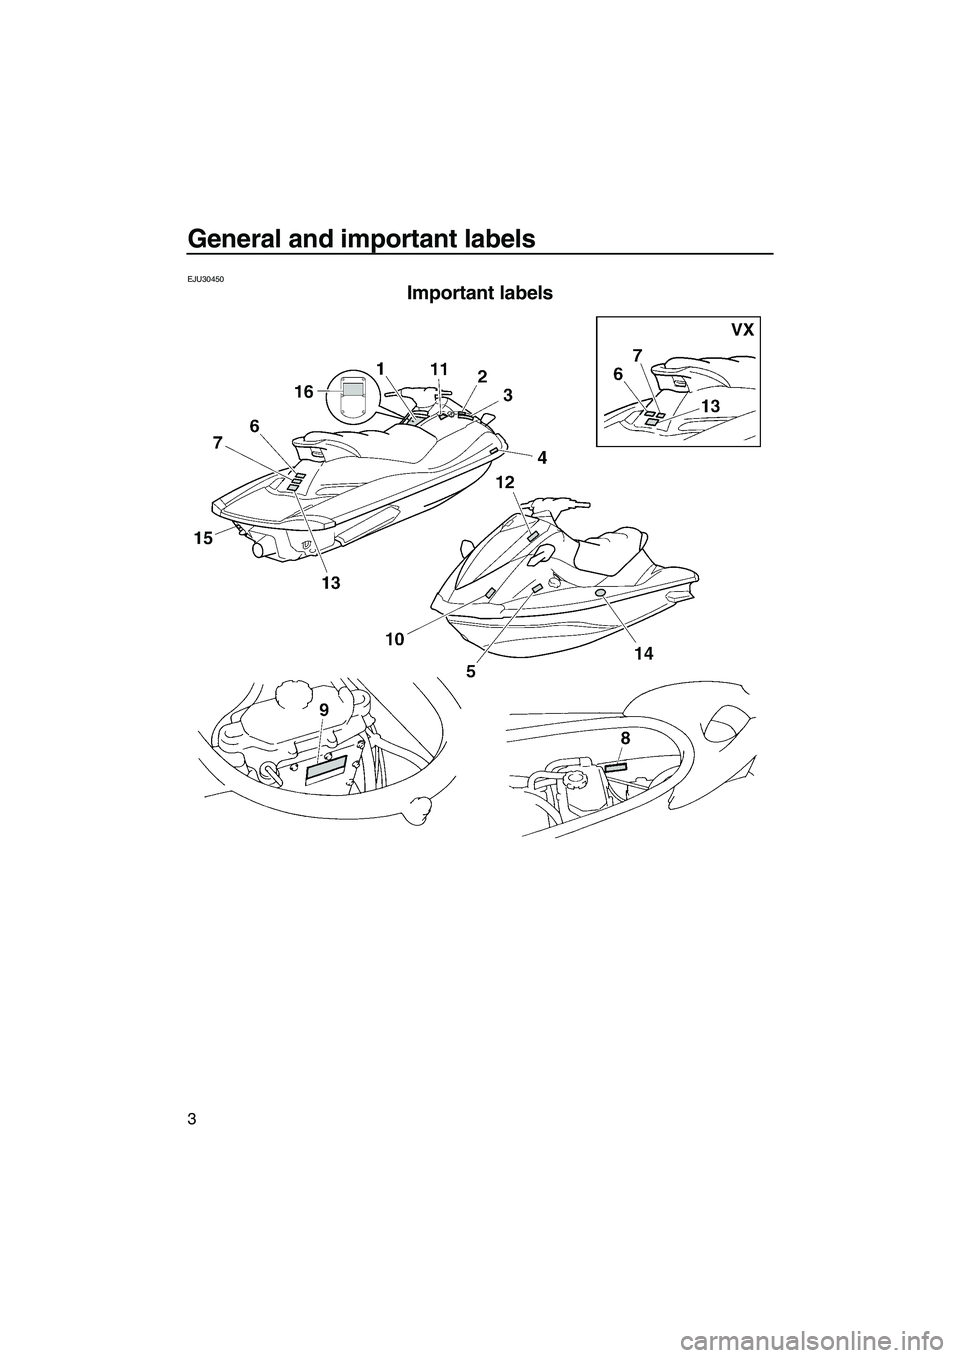 YAMAHA VX 2008  Owners Manual General and important labels
3
EJU30450
Important labels 
UF1K73E0.book  Page 3  Wednesday, July 11, 2007  9:15 AM 